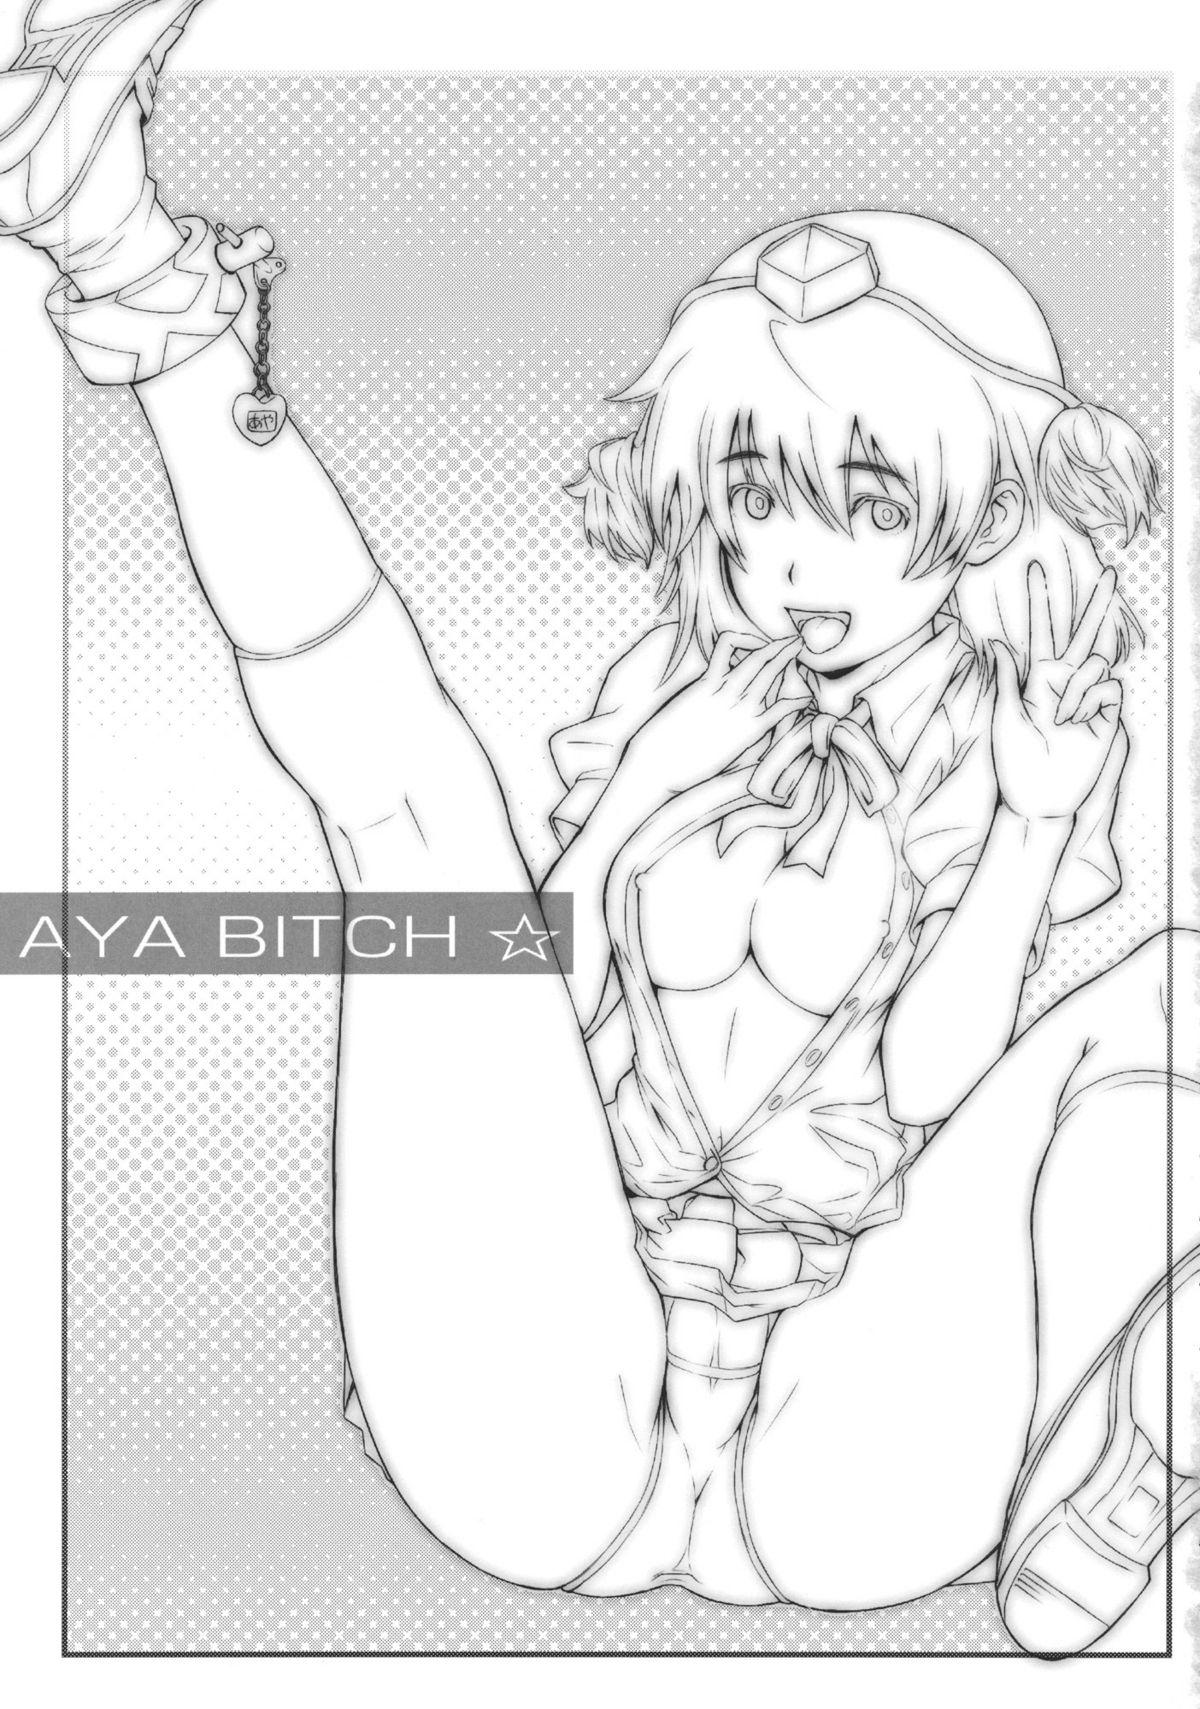 Milfporn Aya Bitch☆ - Touhou project Old - Page 3